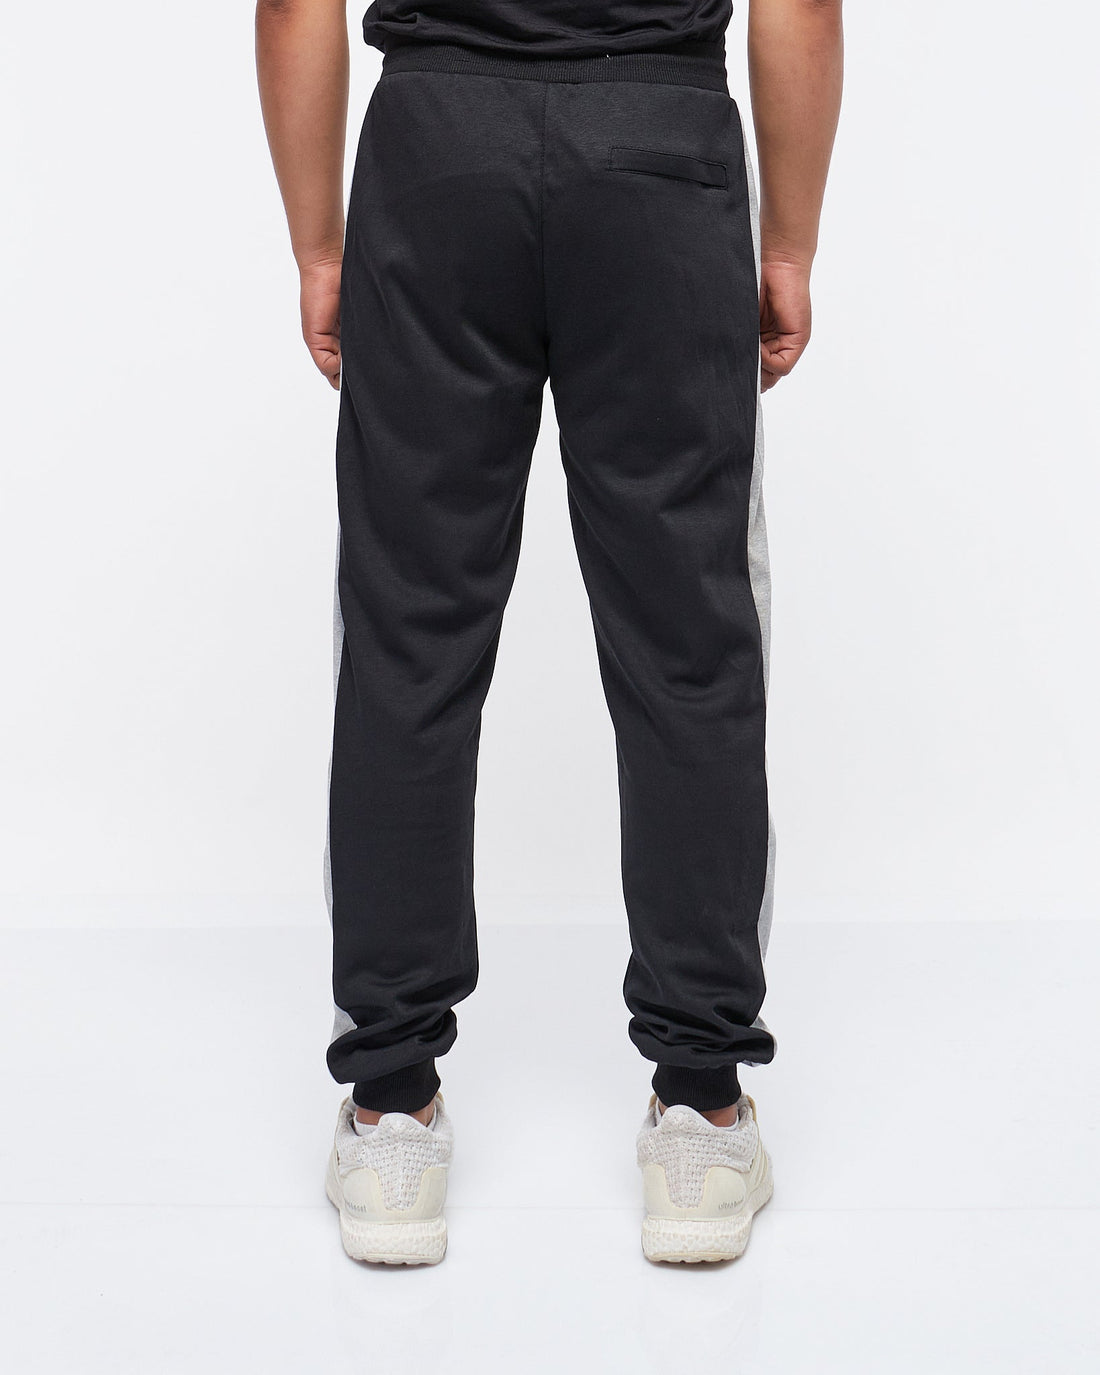 MOI OUTFIT-Side Striped Logo Printed Men Jogger 18.90